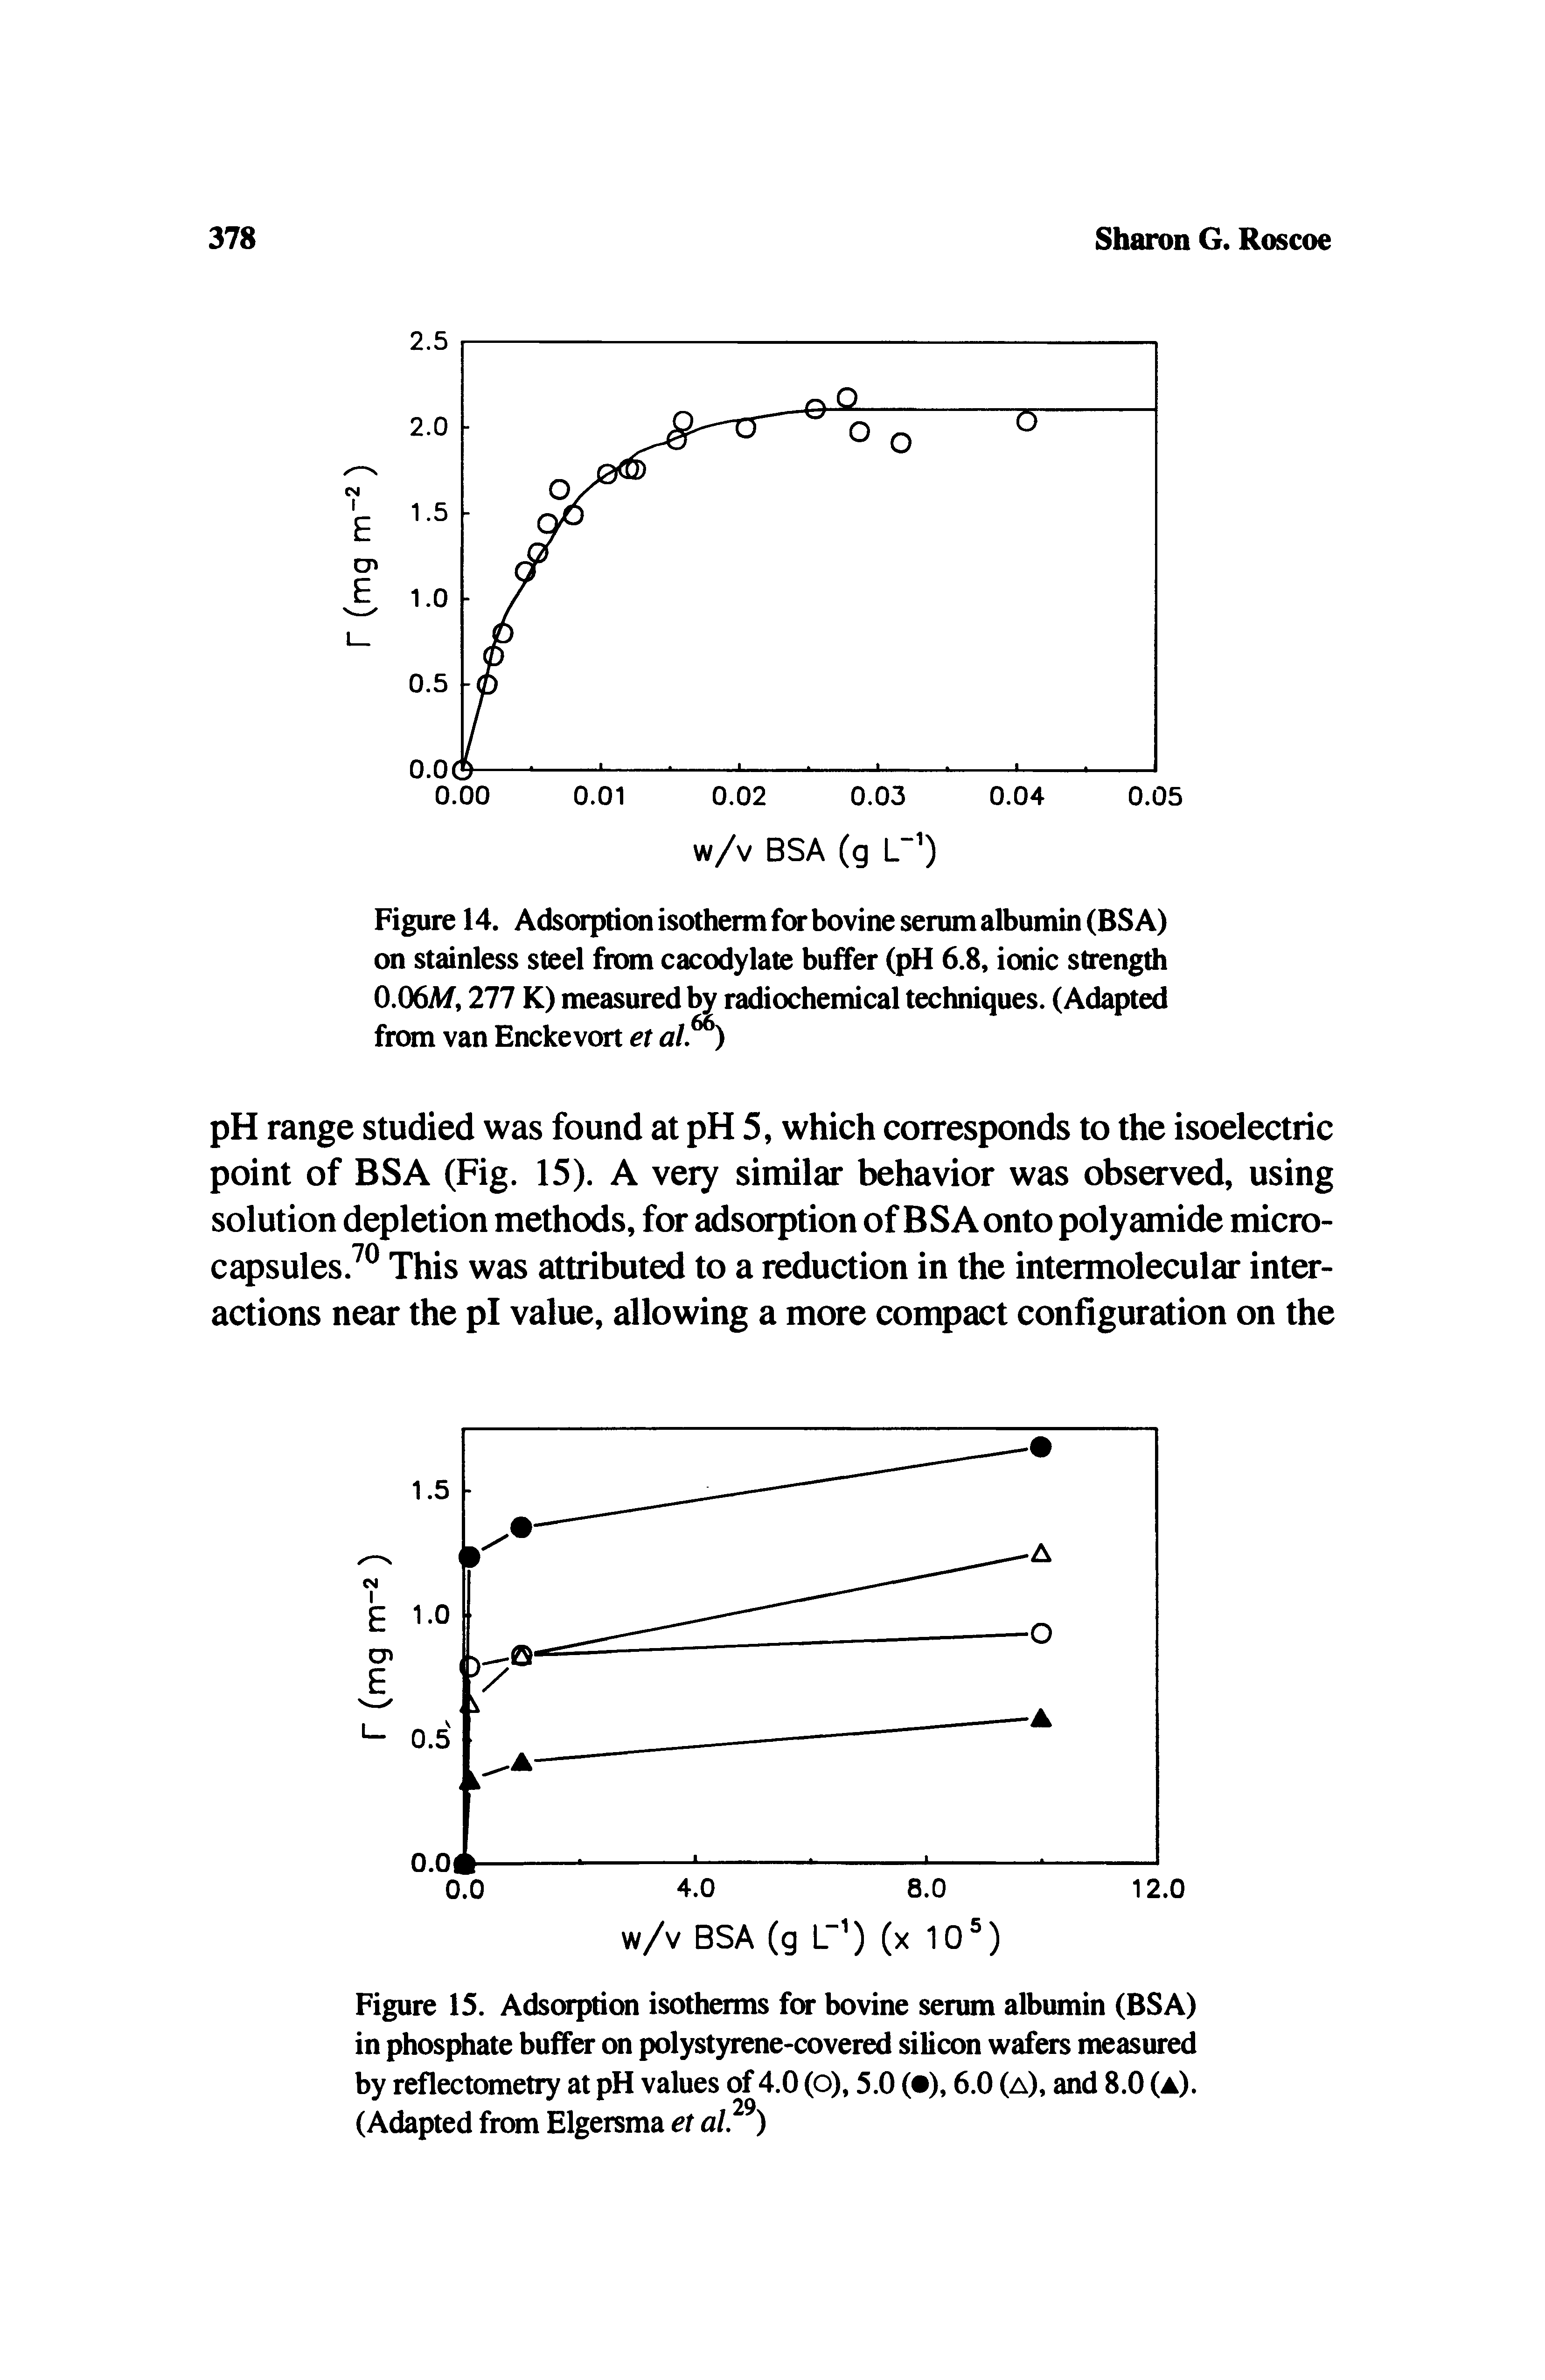 Figure 14. Adsorption isotherm for bovine serum albumin (BSA) on stainless steel from cacodylate buffer (pH 6.8, ionic strength 0.06M, 277 K) measured by radiochemical techniques. (Adapted from van Enckevort et al.)...